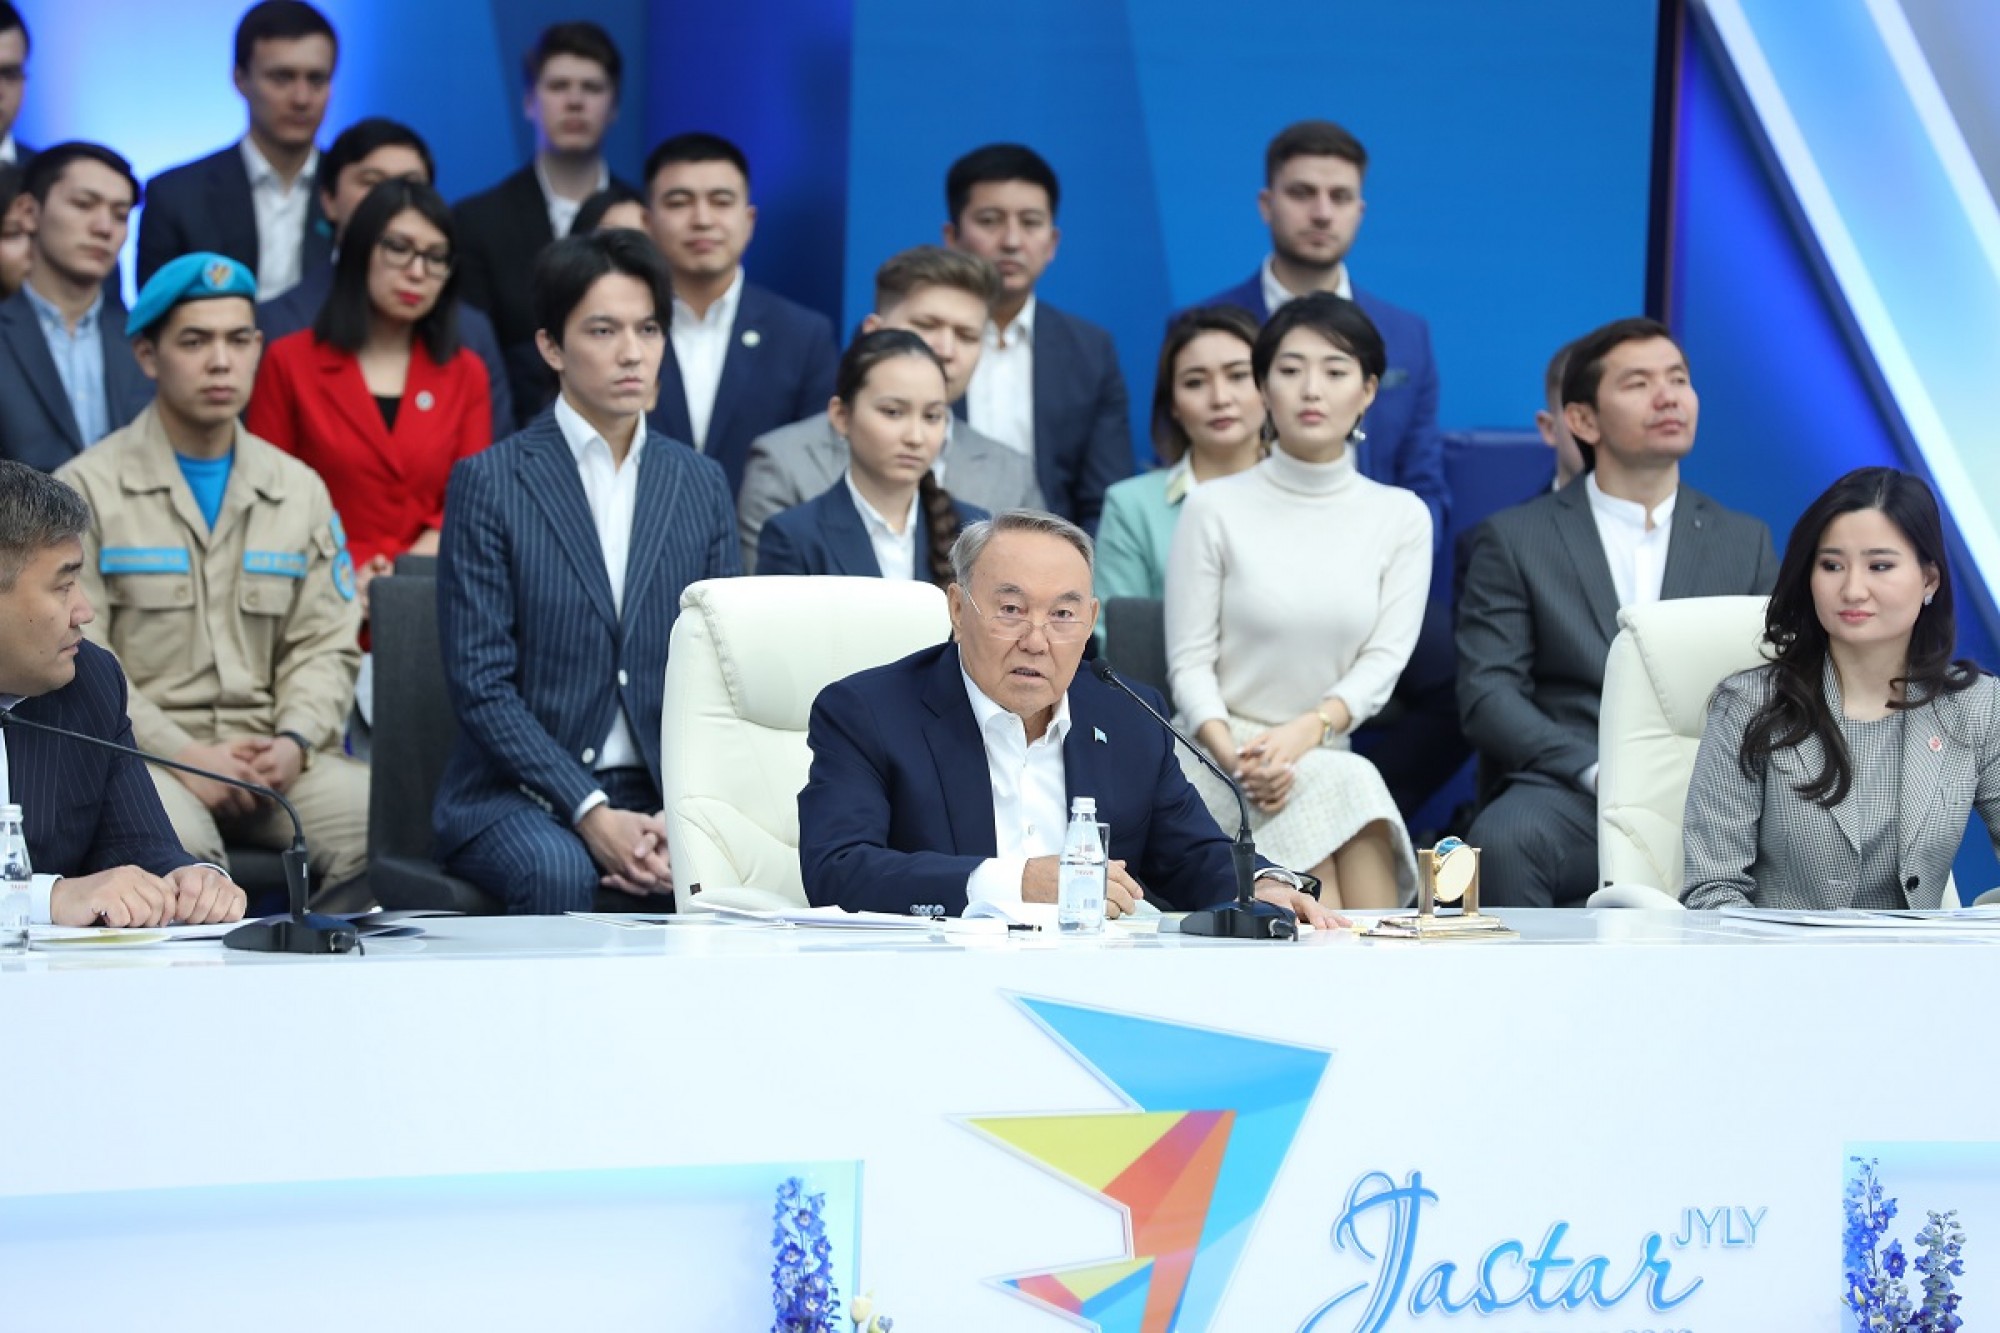 Kazakh President opens the Year of Youth 